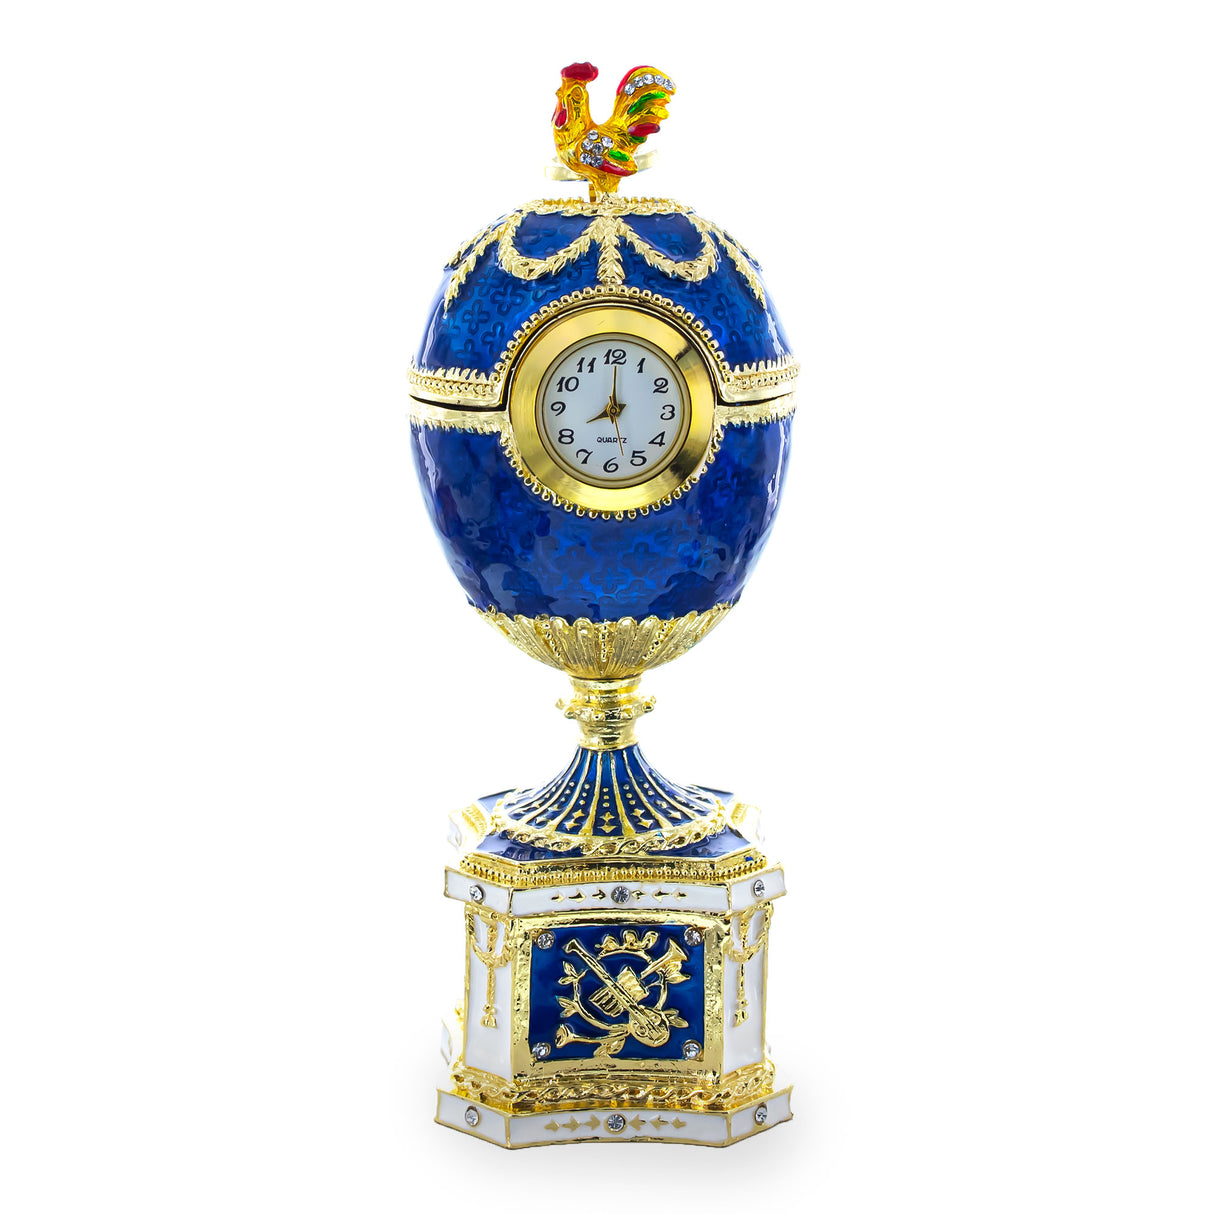 1904 Kelch Chanticleer Blue Enamel Royal Imperial Easter Egg with Clock in Blue color,  shape